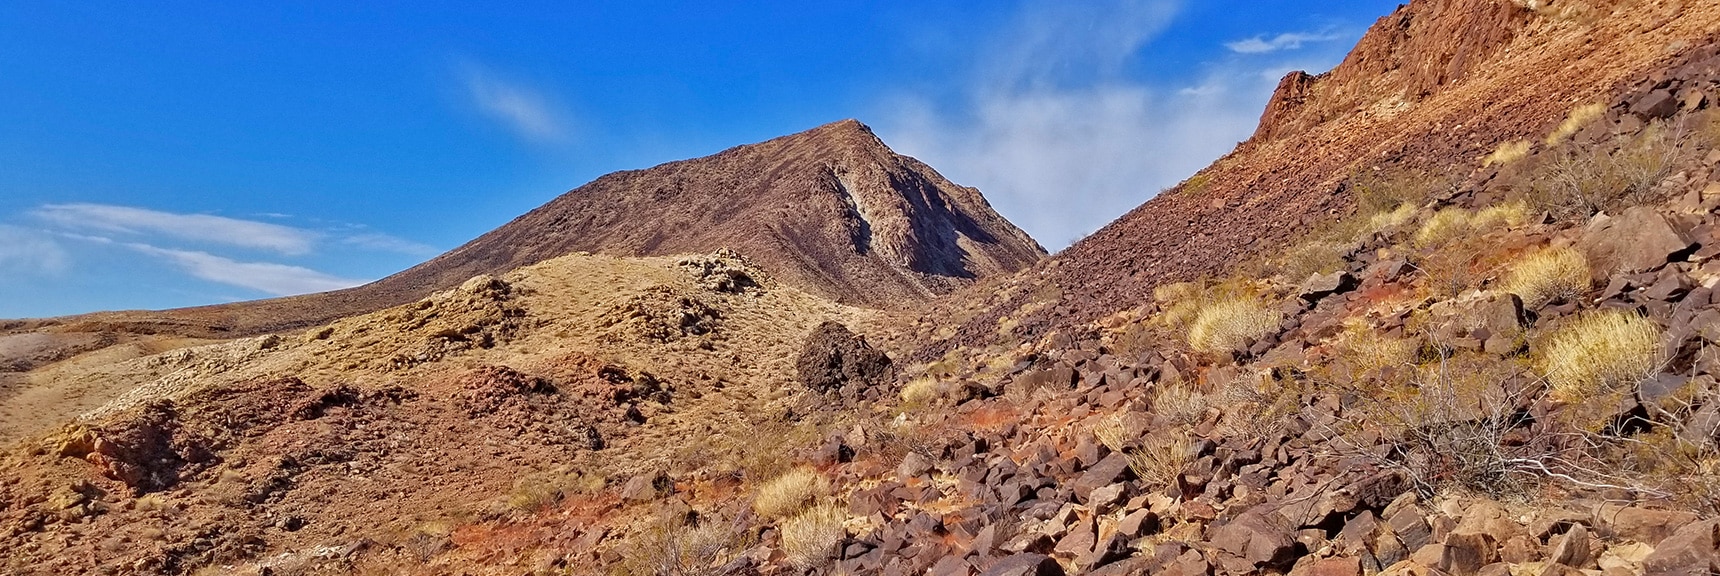 Skirting the East Side of a Ridge Just North of Lava Butte | Lava Butte | Lake Mead National Recreation Area, Nevada